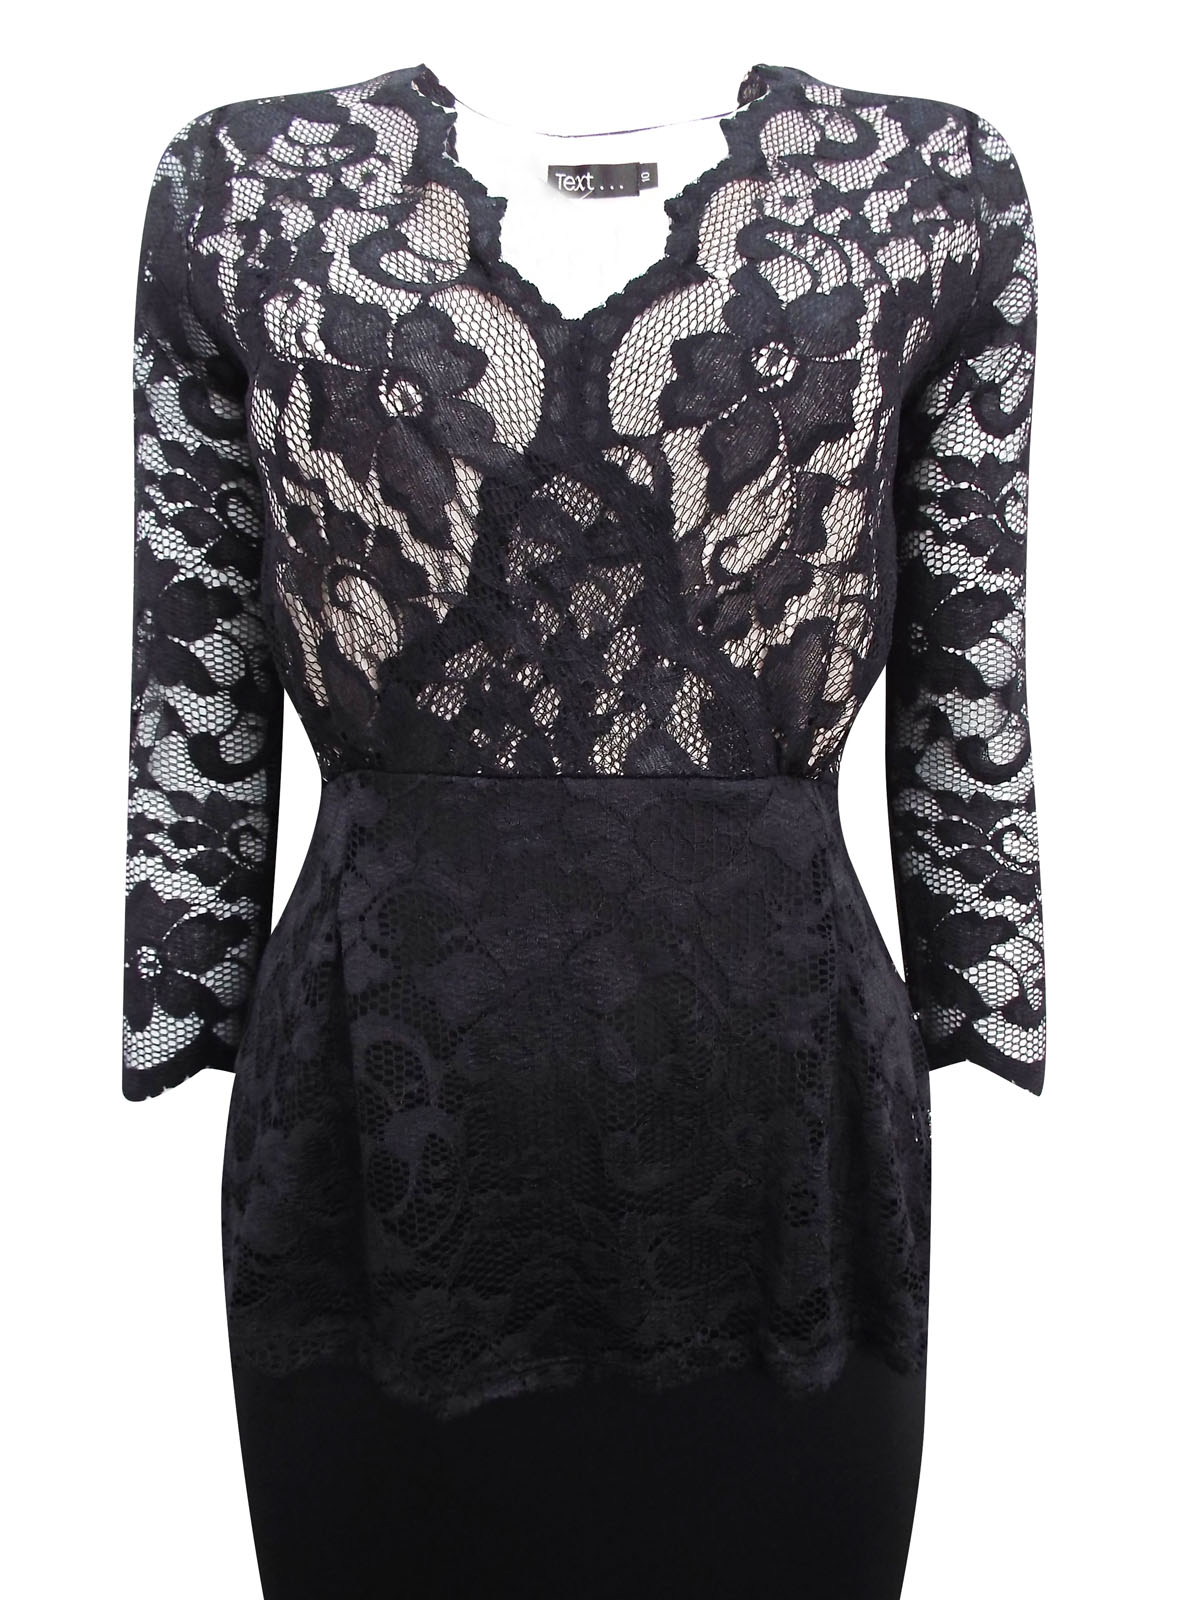 //text.. - - BLACK Floral Lace 3/4 Sleeve Shift Dress - Size 10 to 20